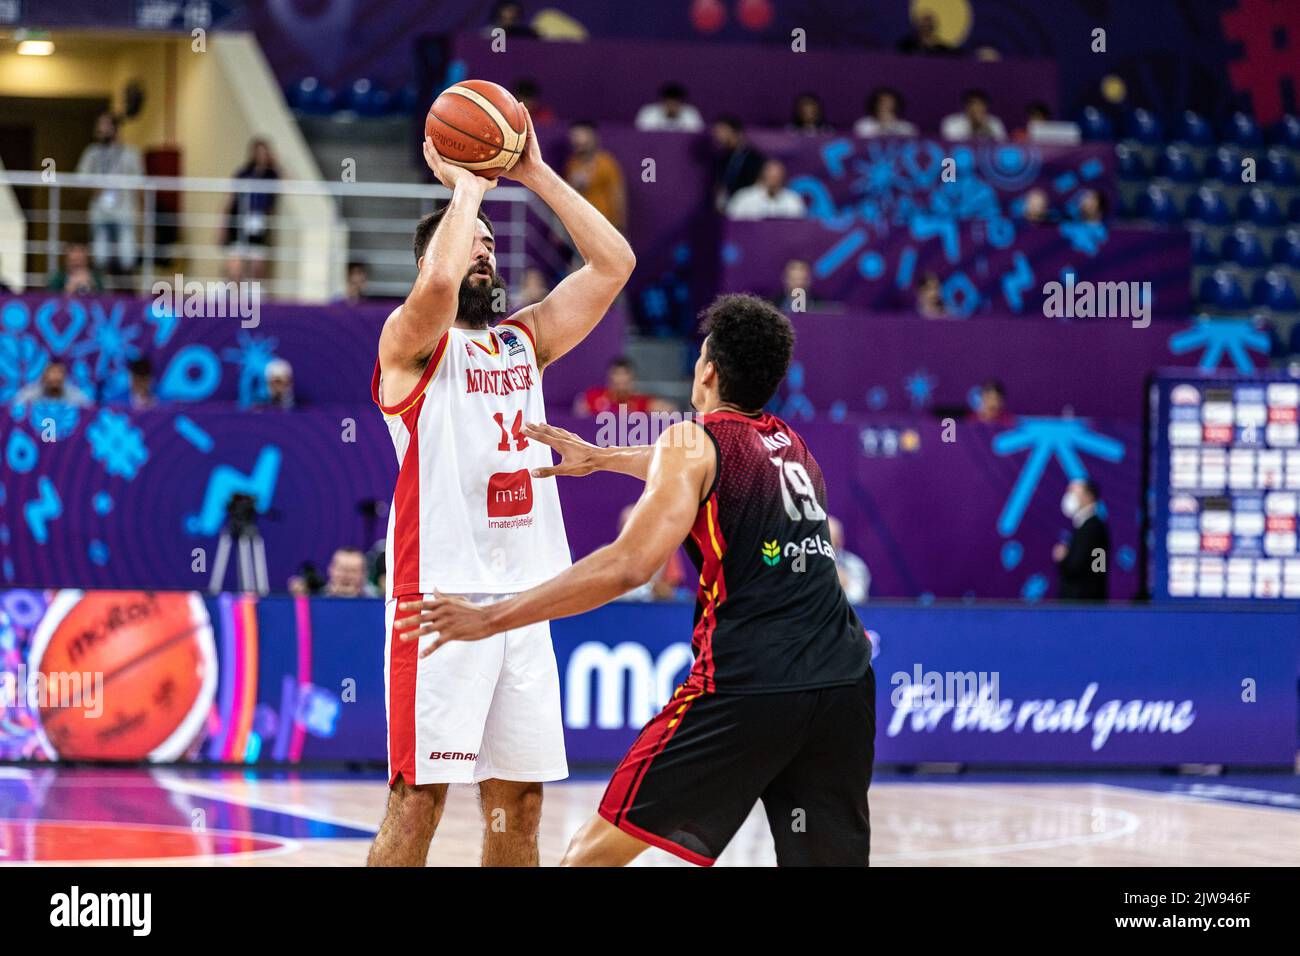 Bojan Dubljevic (L) of Montenegro and Ismael Bako (R) of Belgium seen in action during Day 3 Group A of the FIBA EuroBasket 2022 between Montenegro and Belgium at Tbilisi Arena